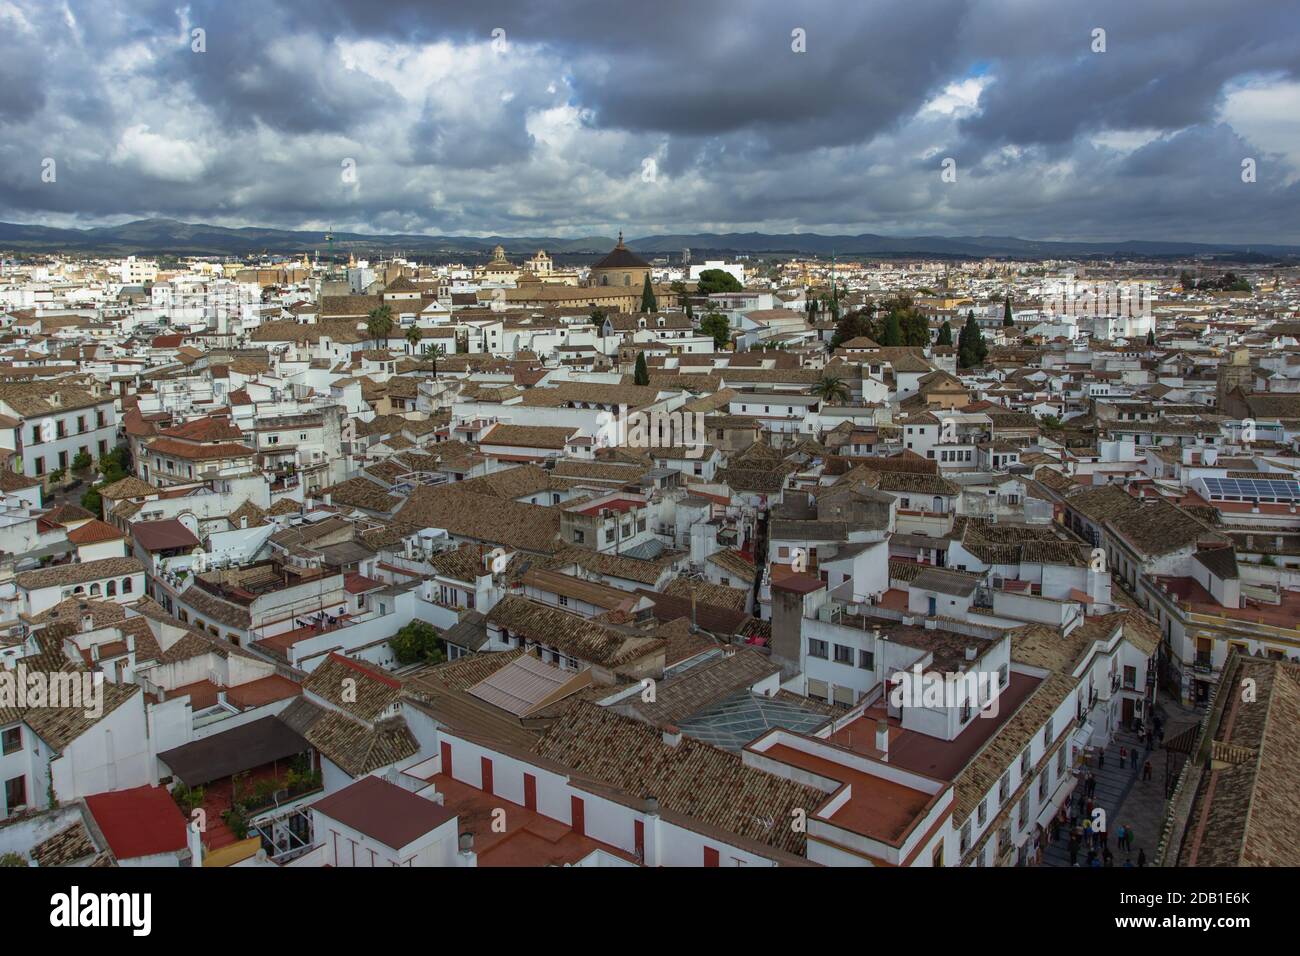 Aerial view of Cordoba,Spain on cloudy day.Spanish city panoramic view from above.White town in Andalusia.Picturesque Cordoba Jewish quarter with the Stock Photo